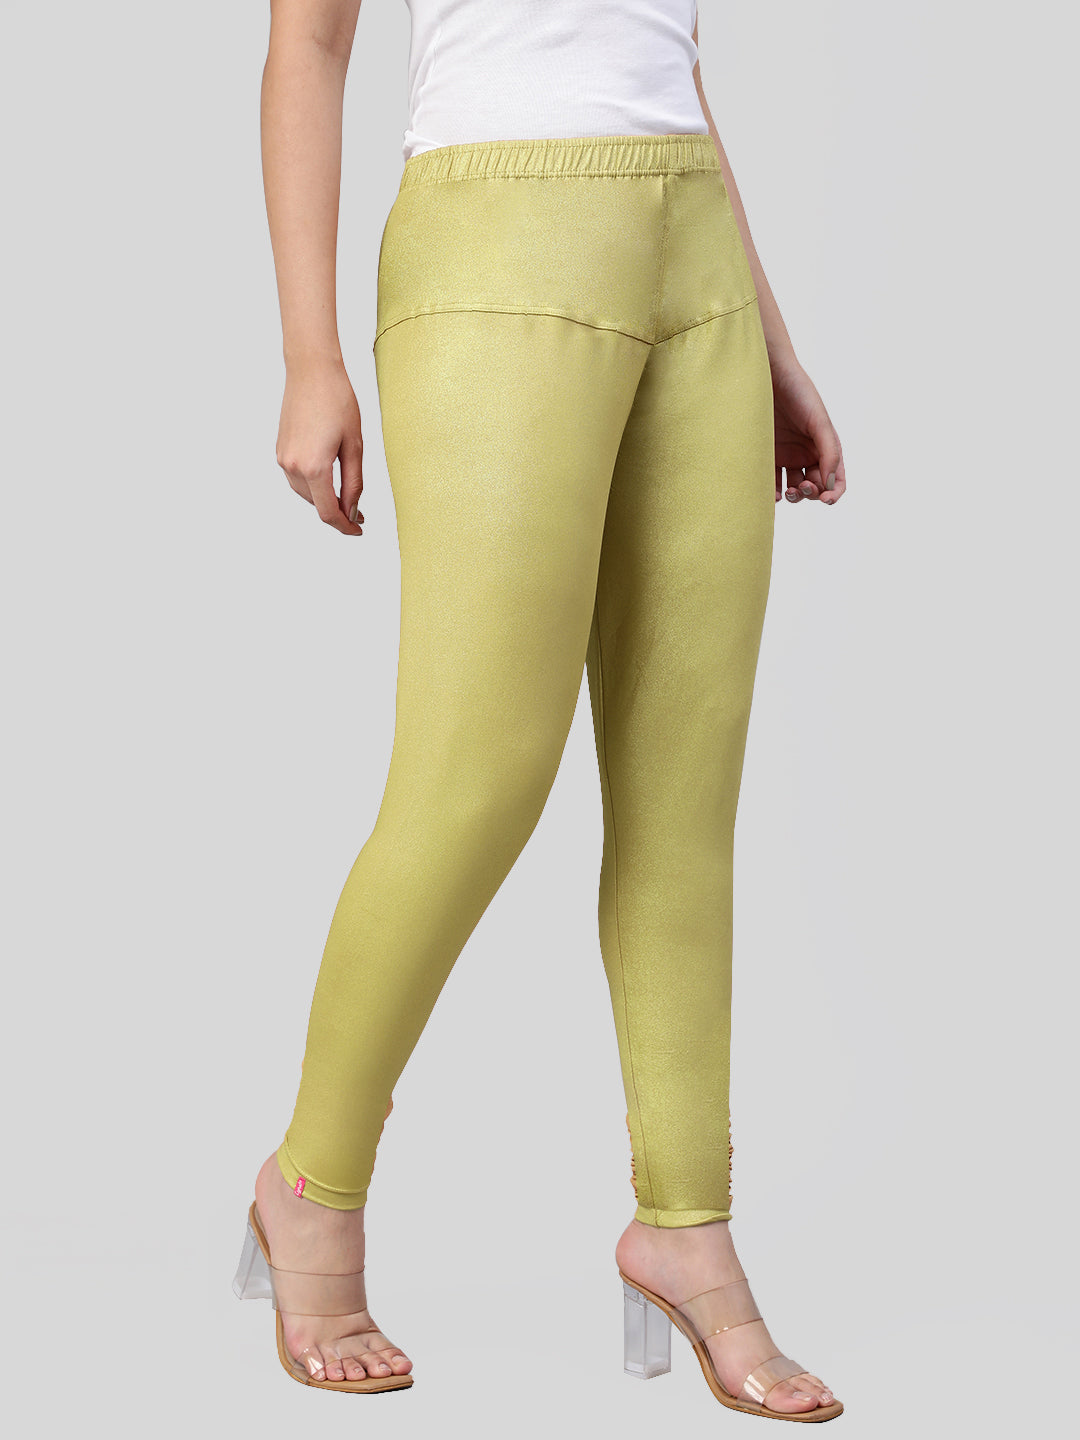 Buy INDIAN FLOWER Women Lycra Churidar legging Beige color Online at Low  Prices in India - Paytmmall.com